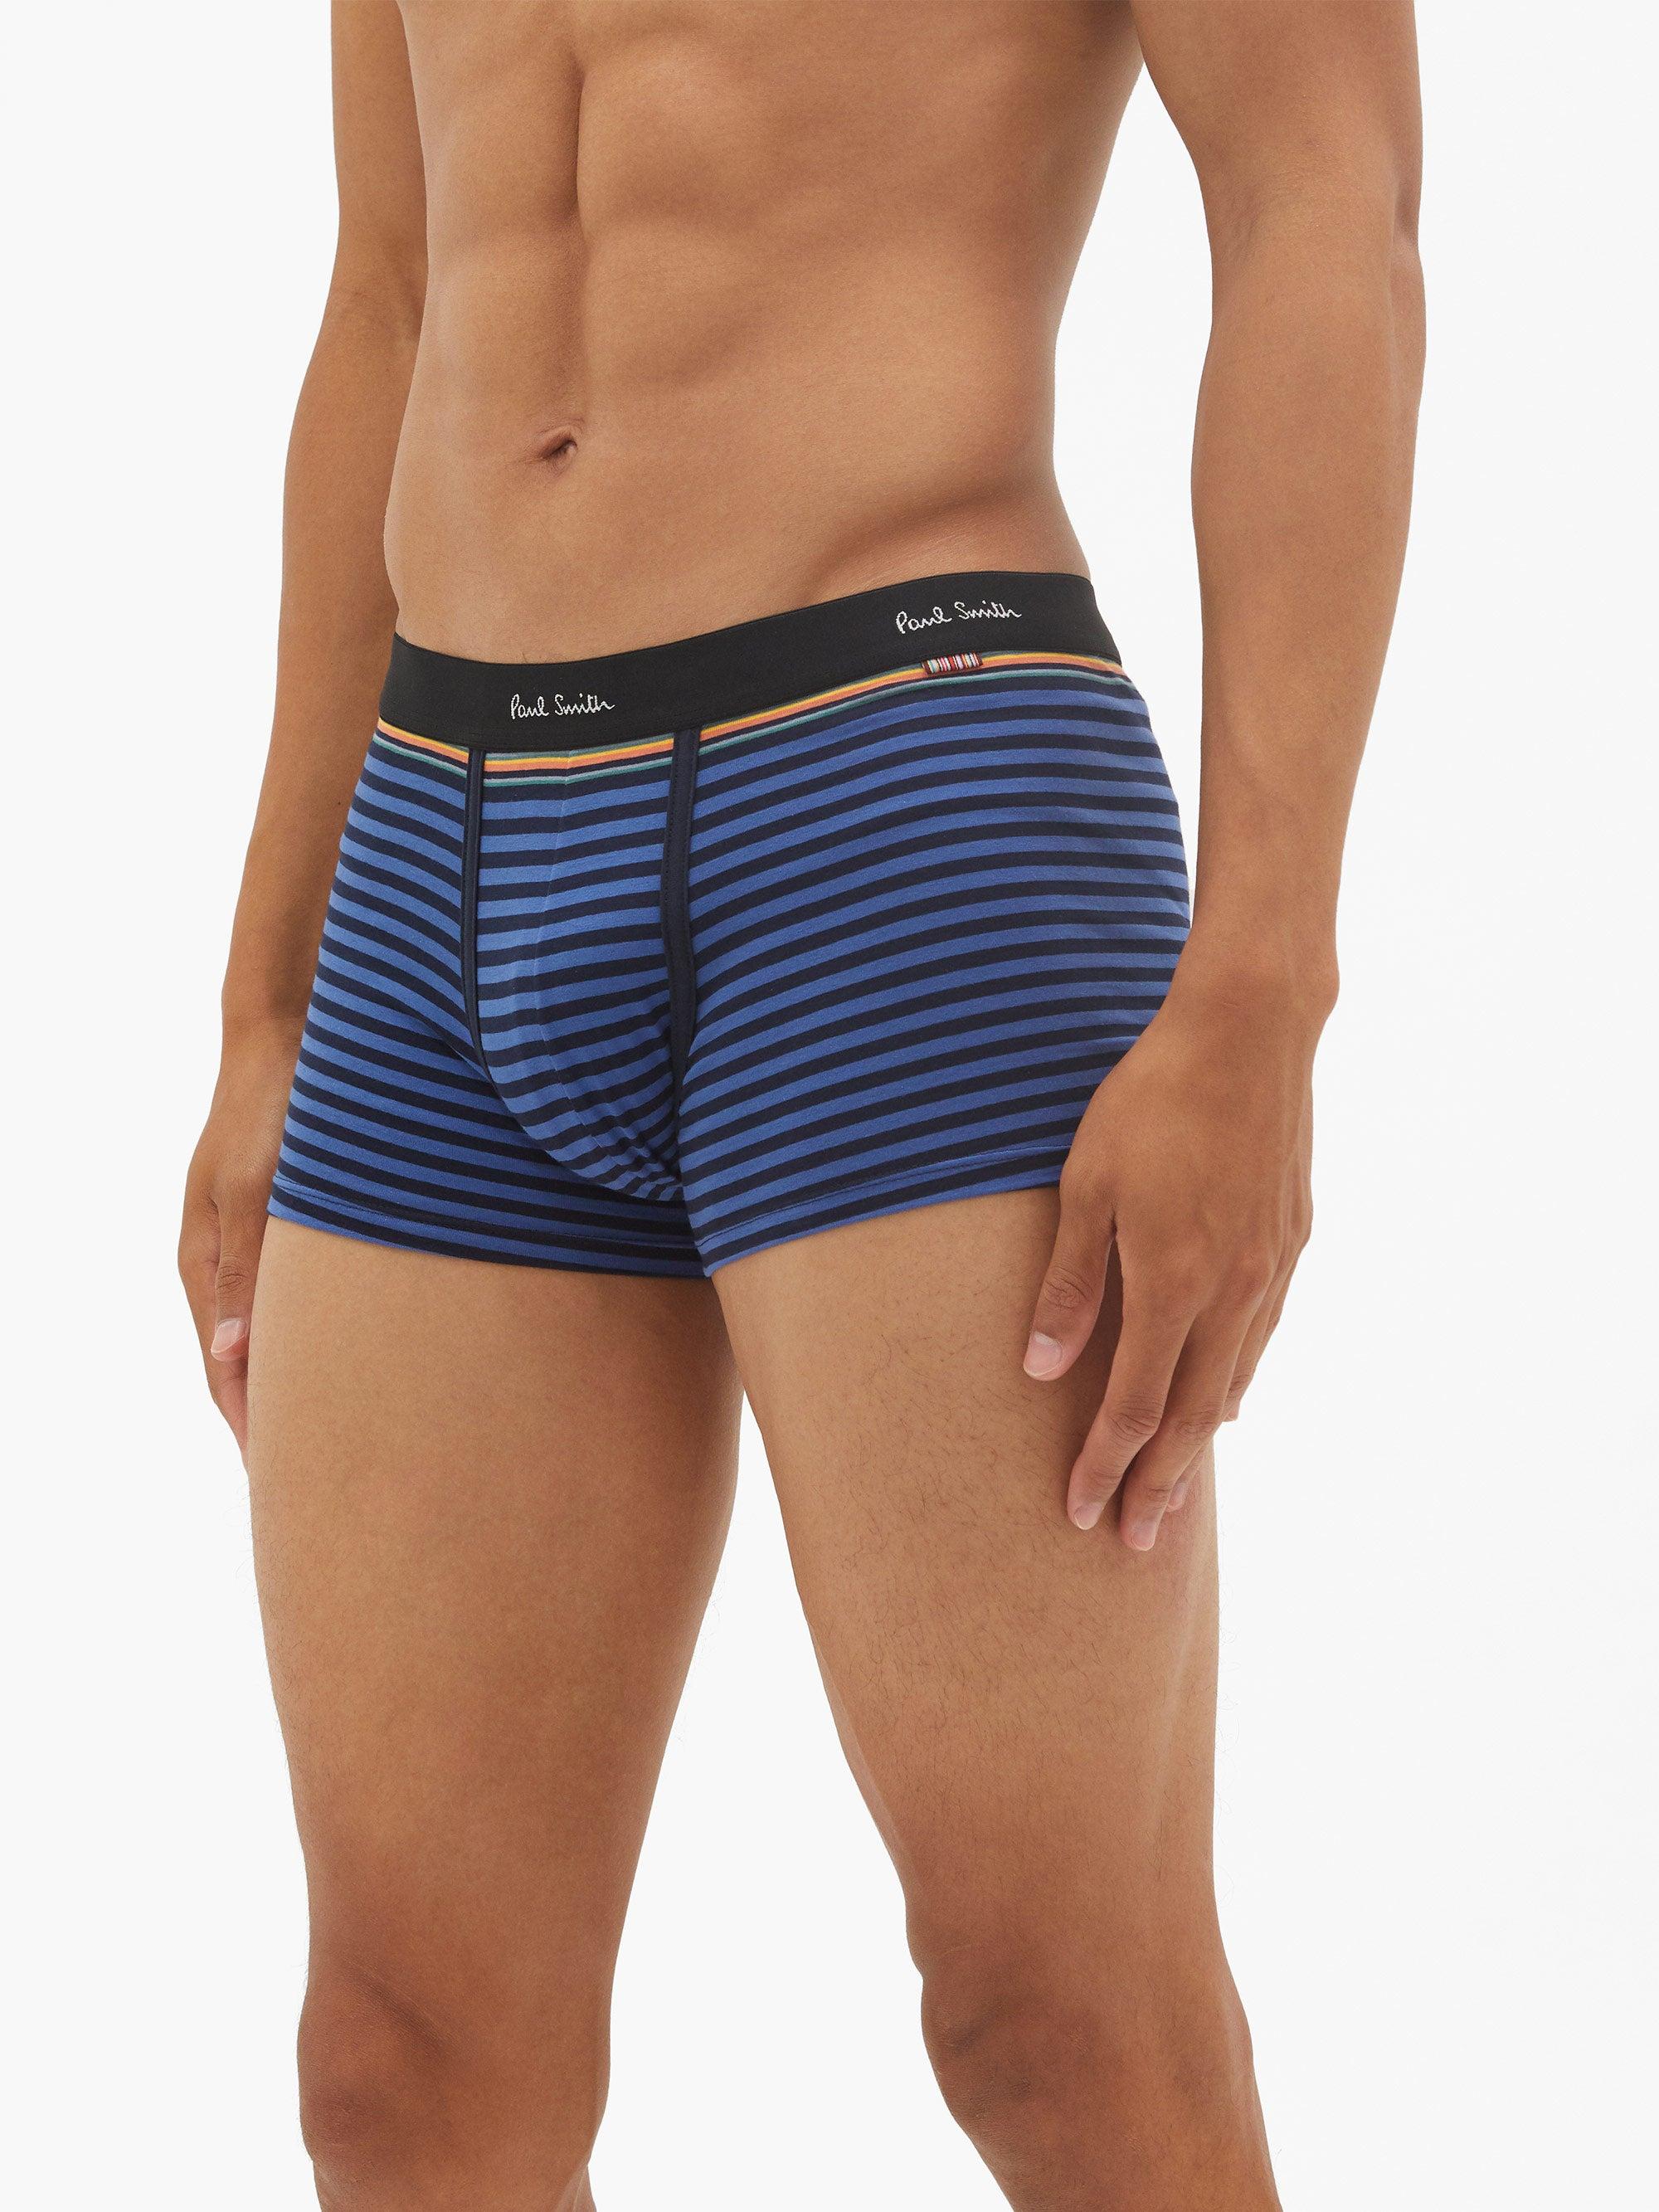 Paul Smith Striped Cotton-blend Boxer Briefs in Blue for Men - Lyst